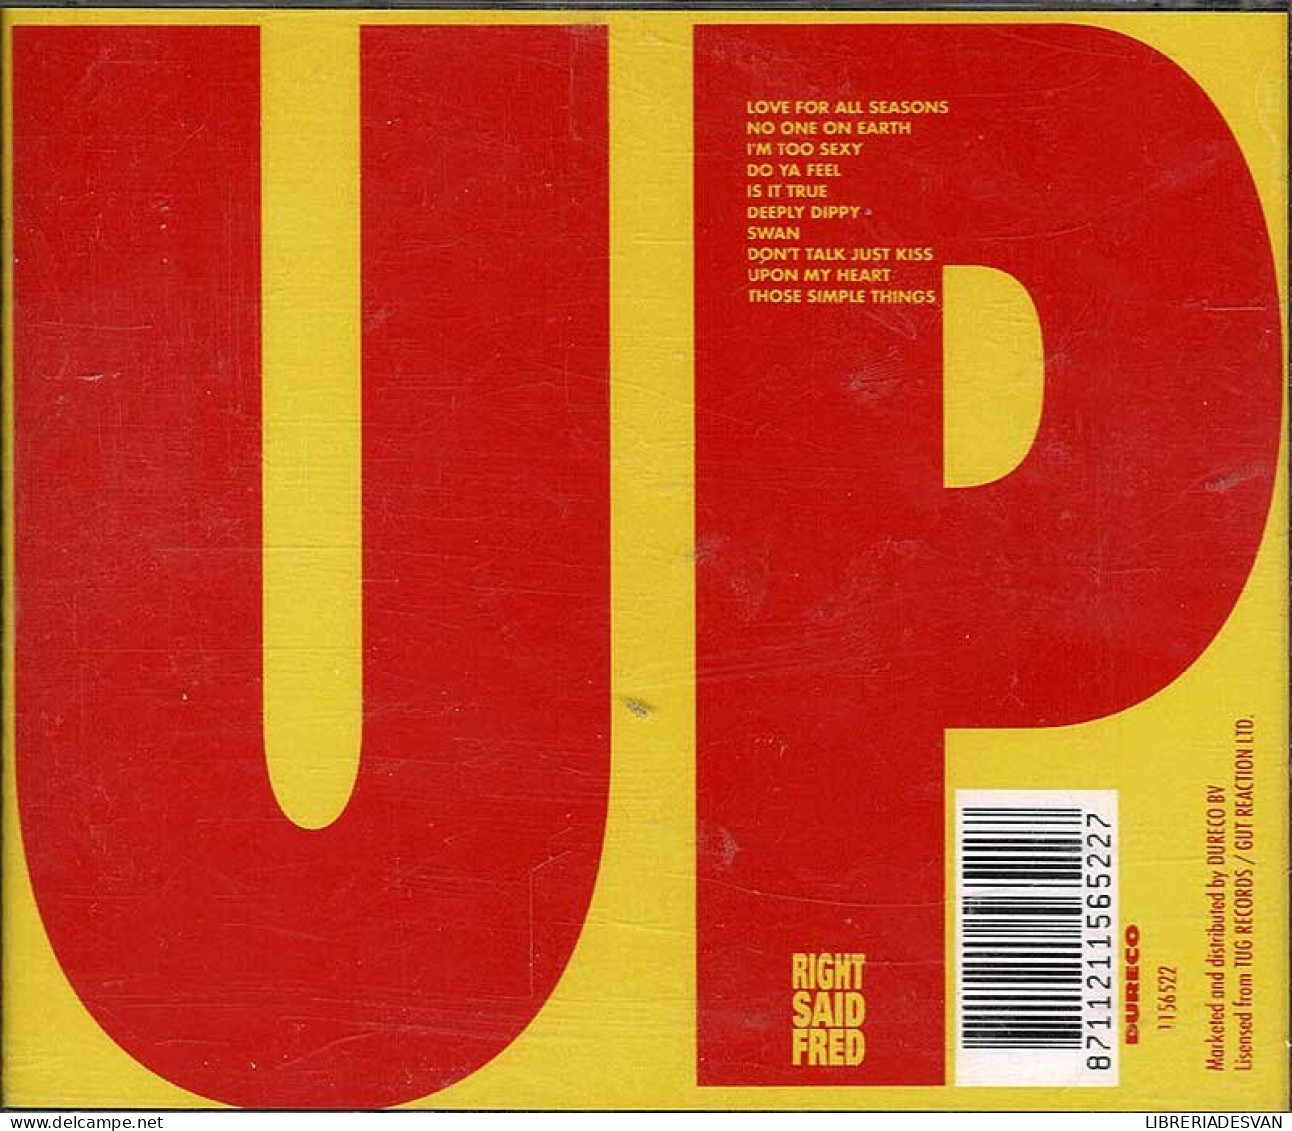 Right Said Fred - Up. CD - Dance, Techno & House